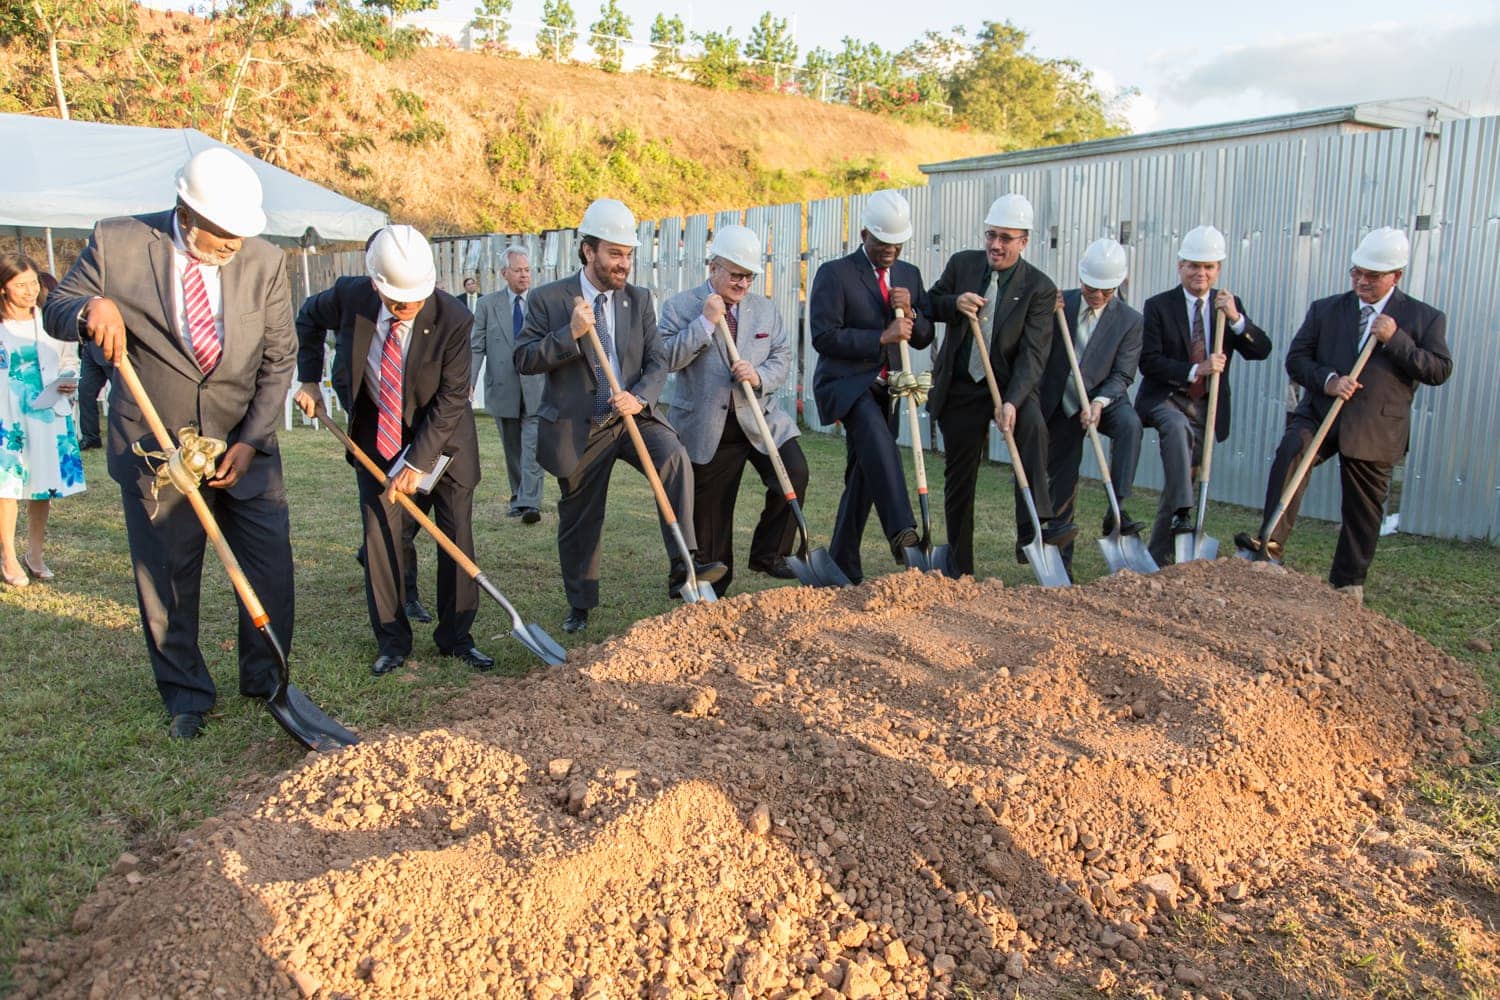 Seventh-day Adventist leaders form Inter-America and the Adventist World Church break ground for the new facility that will house two of church’s higher education institutions, on the campus of Antillean Adventist University in Mayaguez, Puerto Rico. The ceremony brought dozens of church leaders and educators on Jan. 19, 2017. (Image courtesy of IATS)